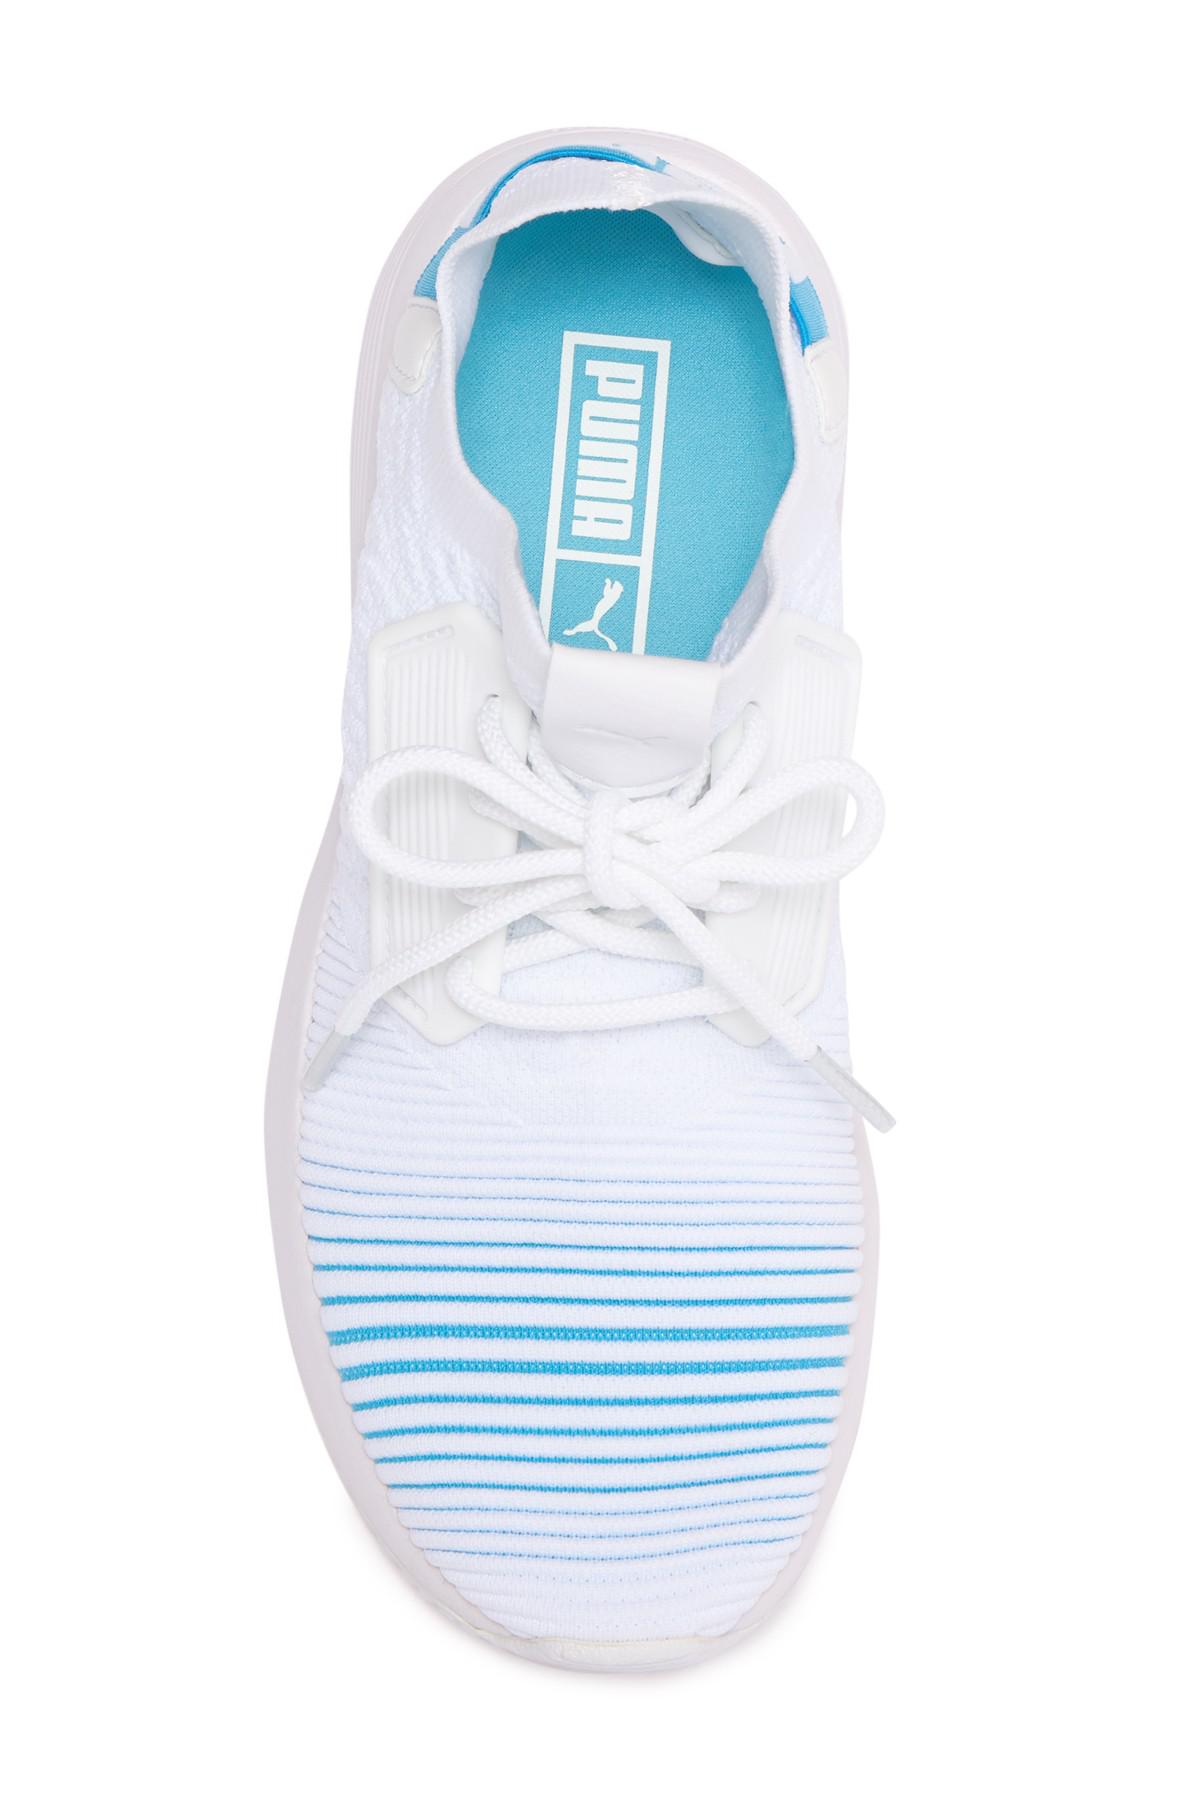 PUMA Rubber Uprise Color Shift Sneakers in White | Lyst